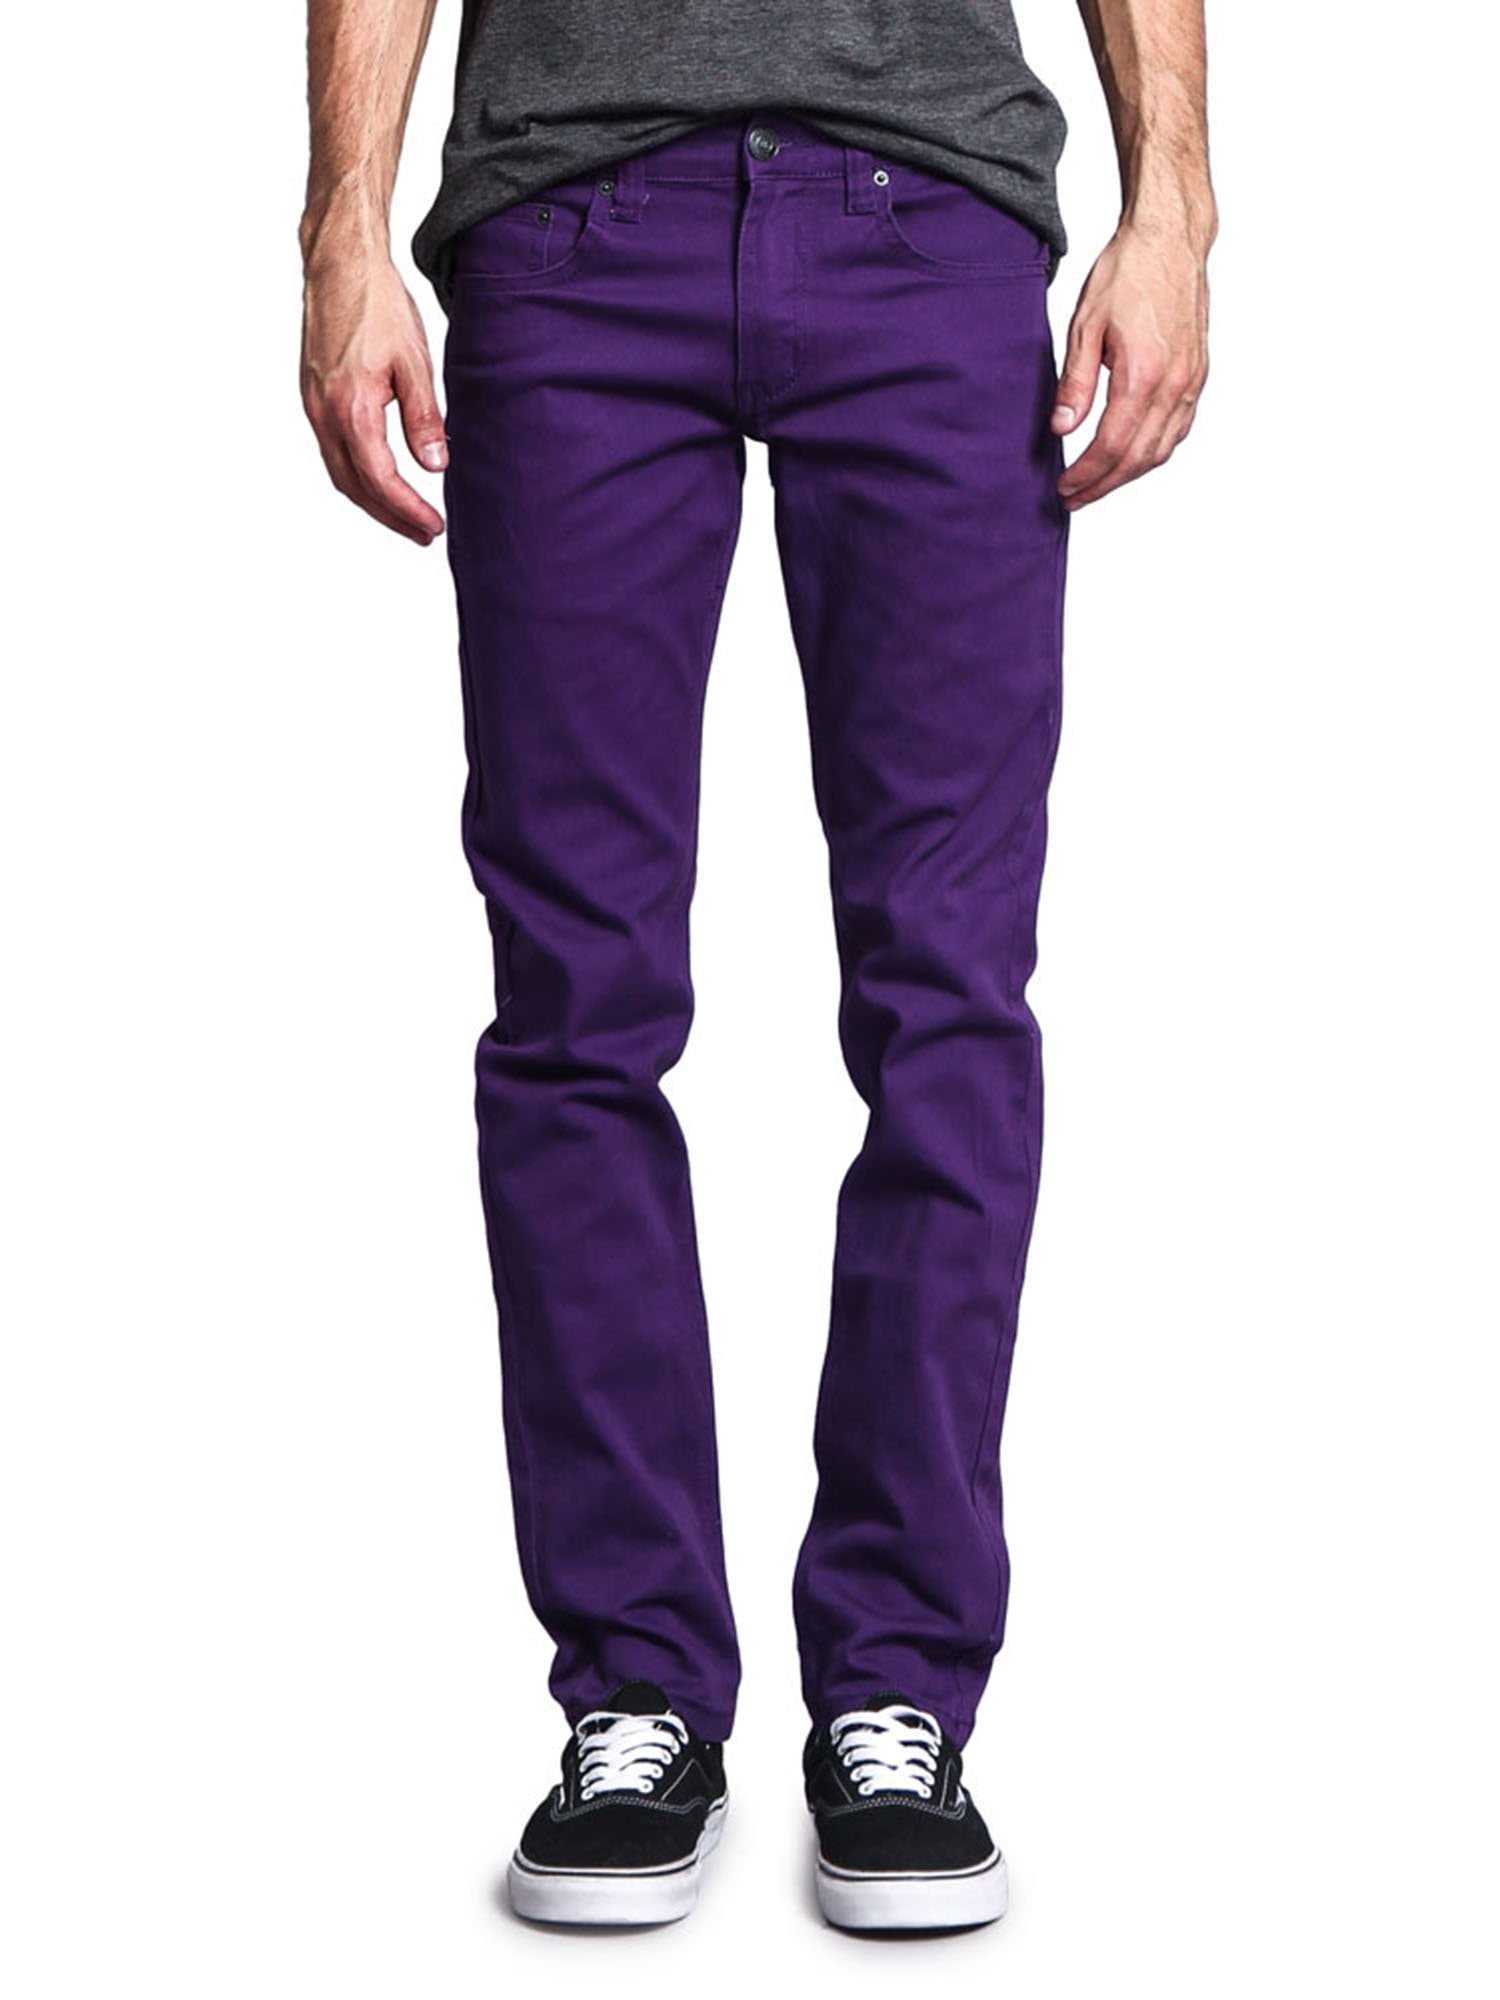 G-Style USA - Victorious Men's Skinny Fit Color Stretch Jeans - Purple ...